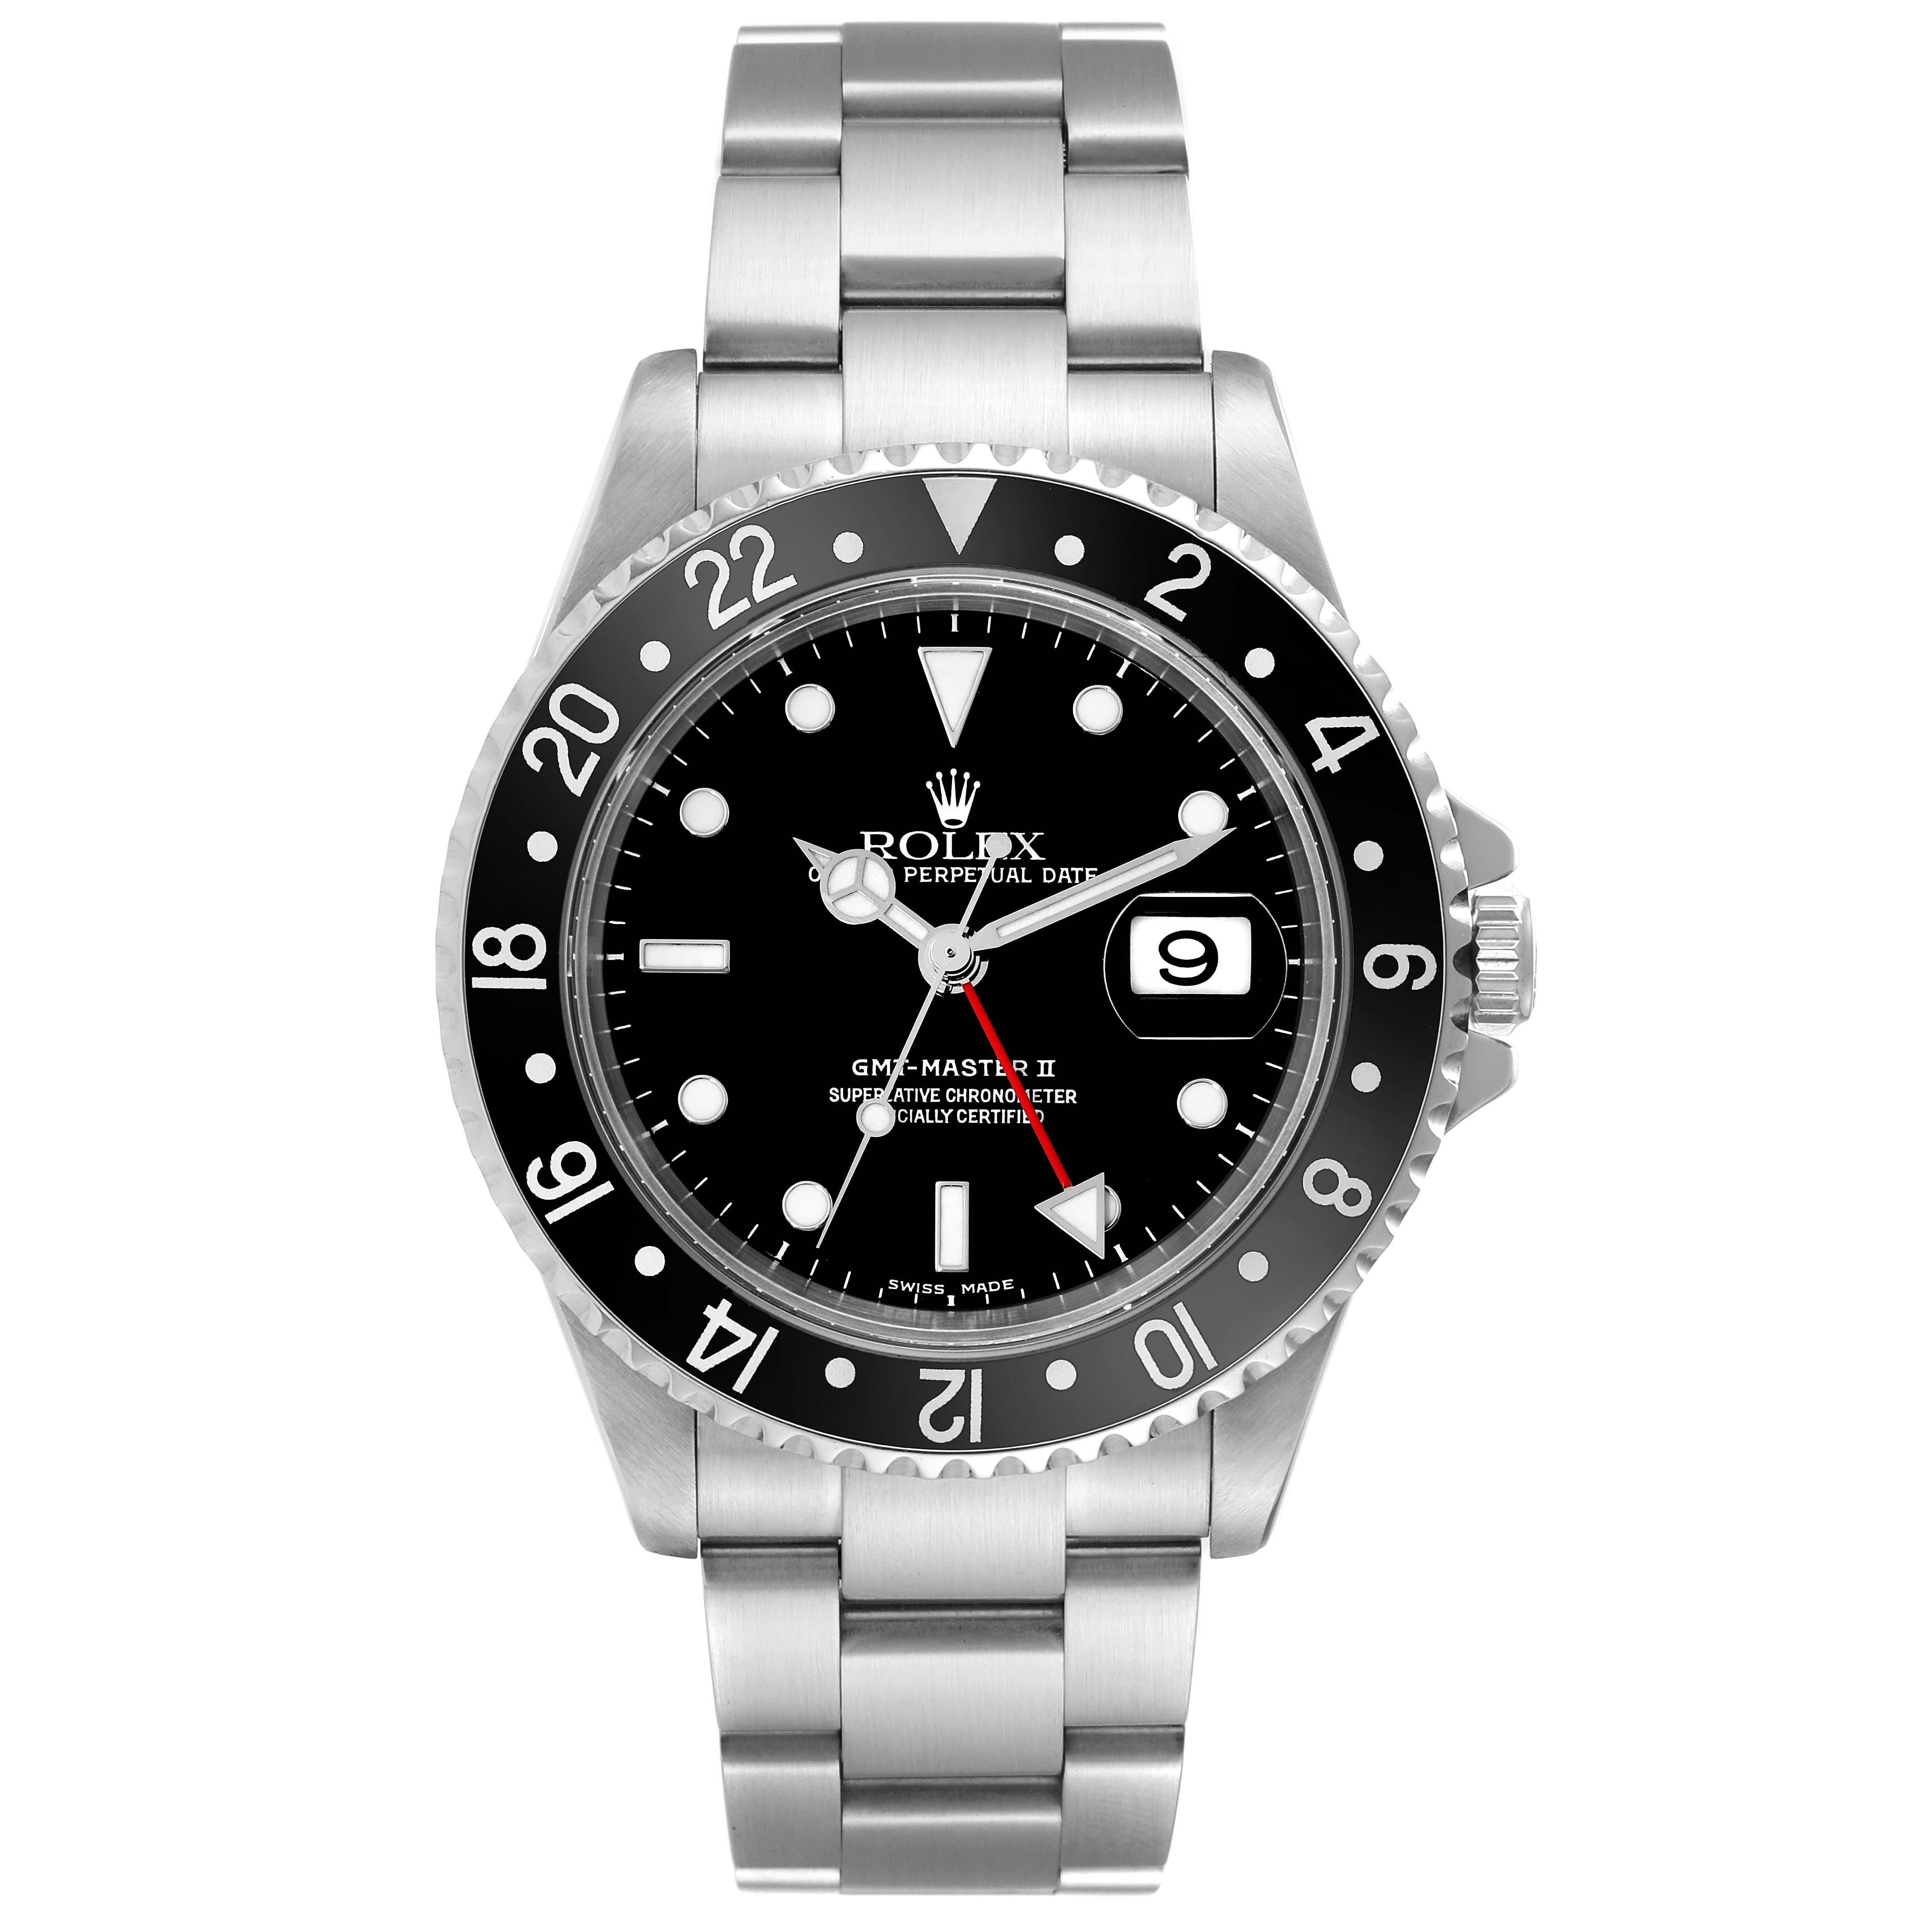 Rolex GMT Master II Black Bezel Dial Steel Mens Watch 16710. Officially certified chronometer automatic self-winding movement. Stainless steel case 40 mm in diameter. Rolex logo on a crown. Bidirectional rotating bezel with a special 24-hour black